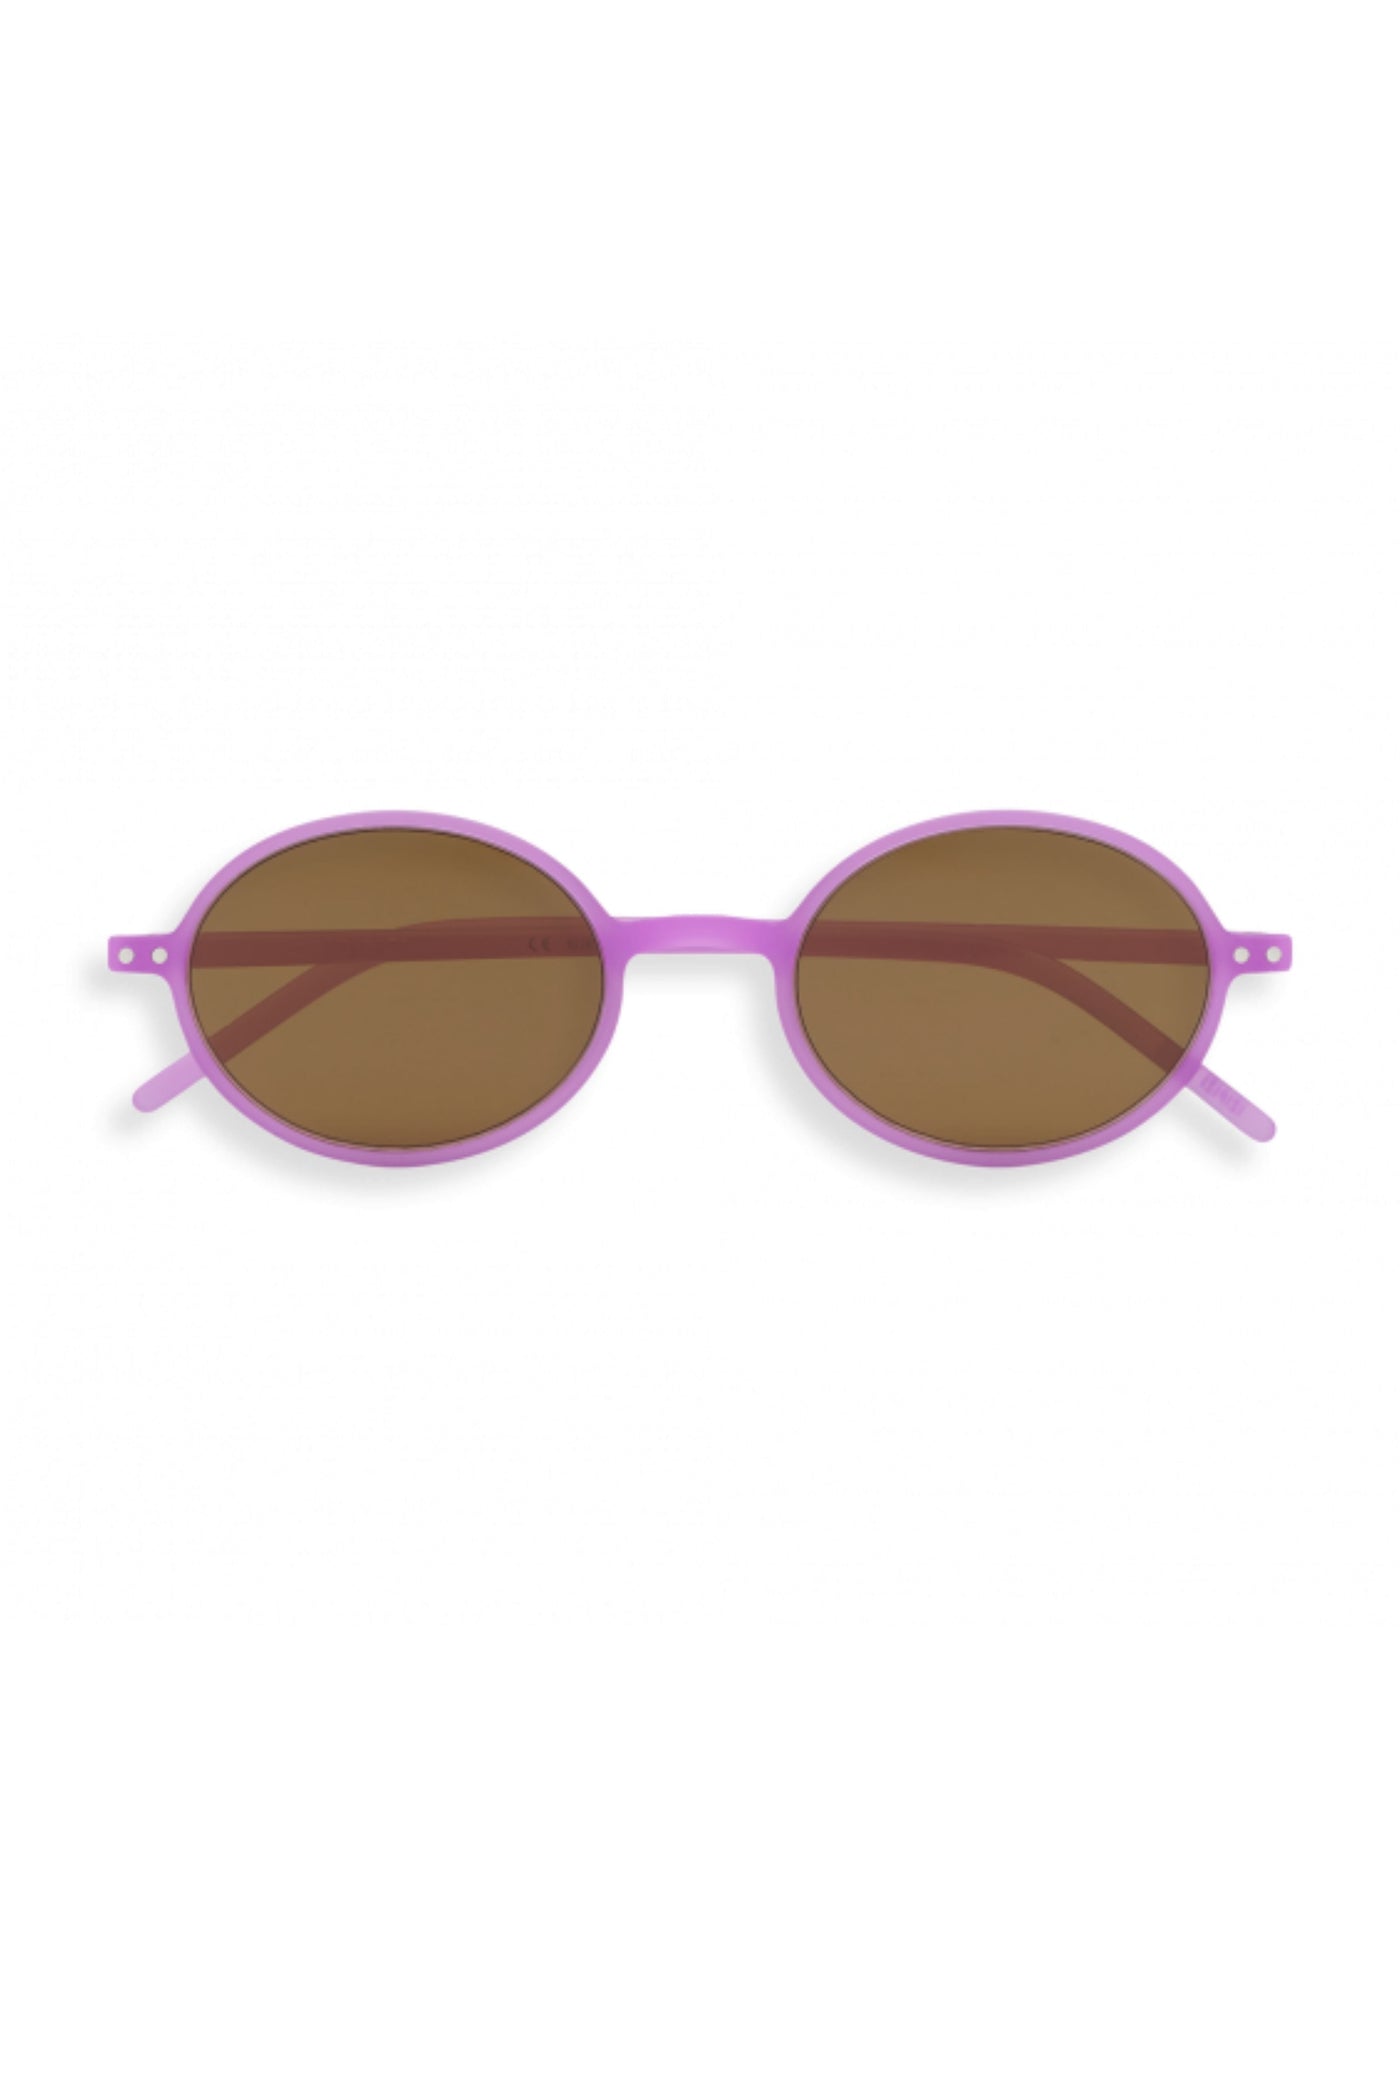 Izipizi Slim Sunglasses - Mallow-Accessories-Ohh! By Gum - Shop Sustainable